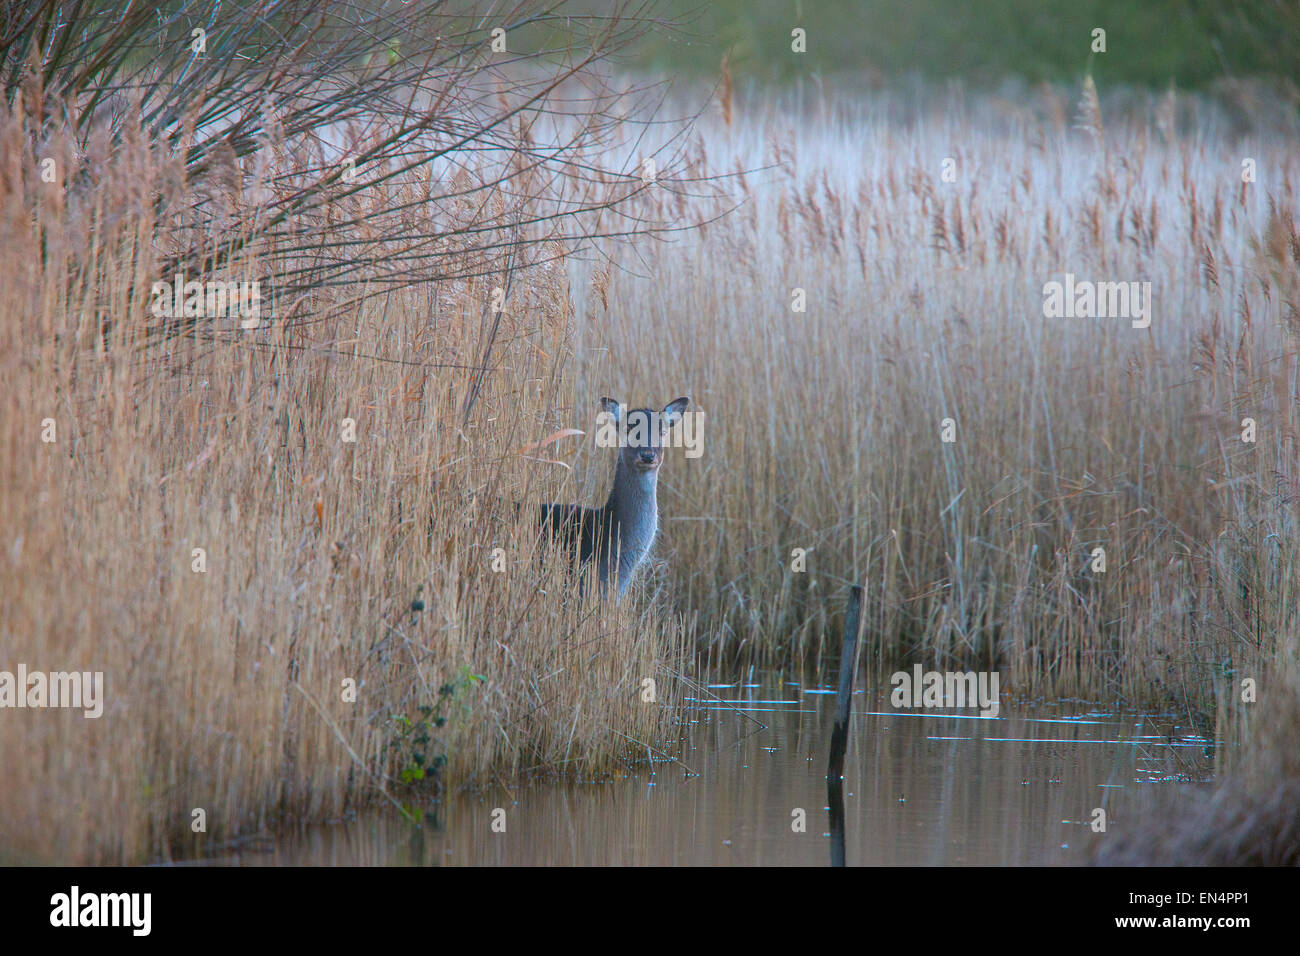 Fallow Deer at the edge of a reed bed at dusk, Cambridgeshire, England, UK. Stock Photo